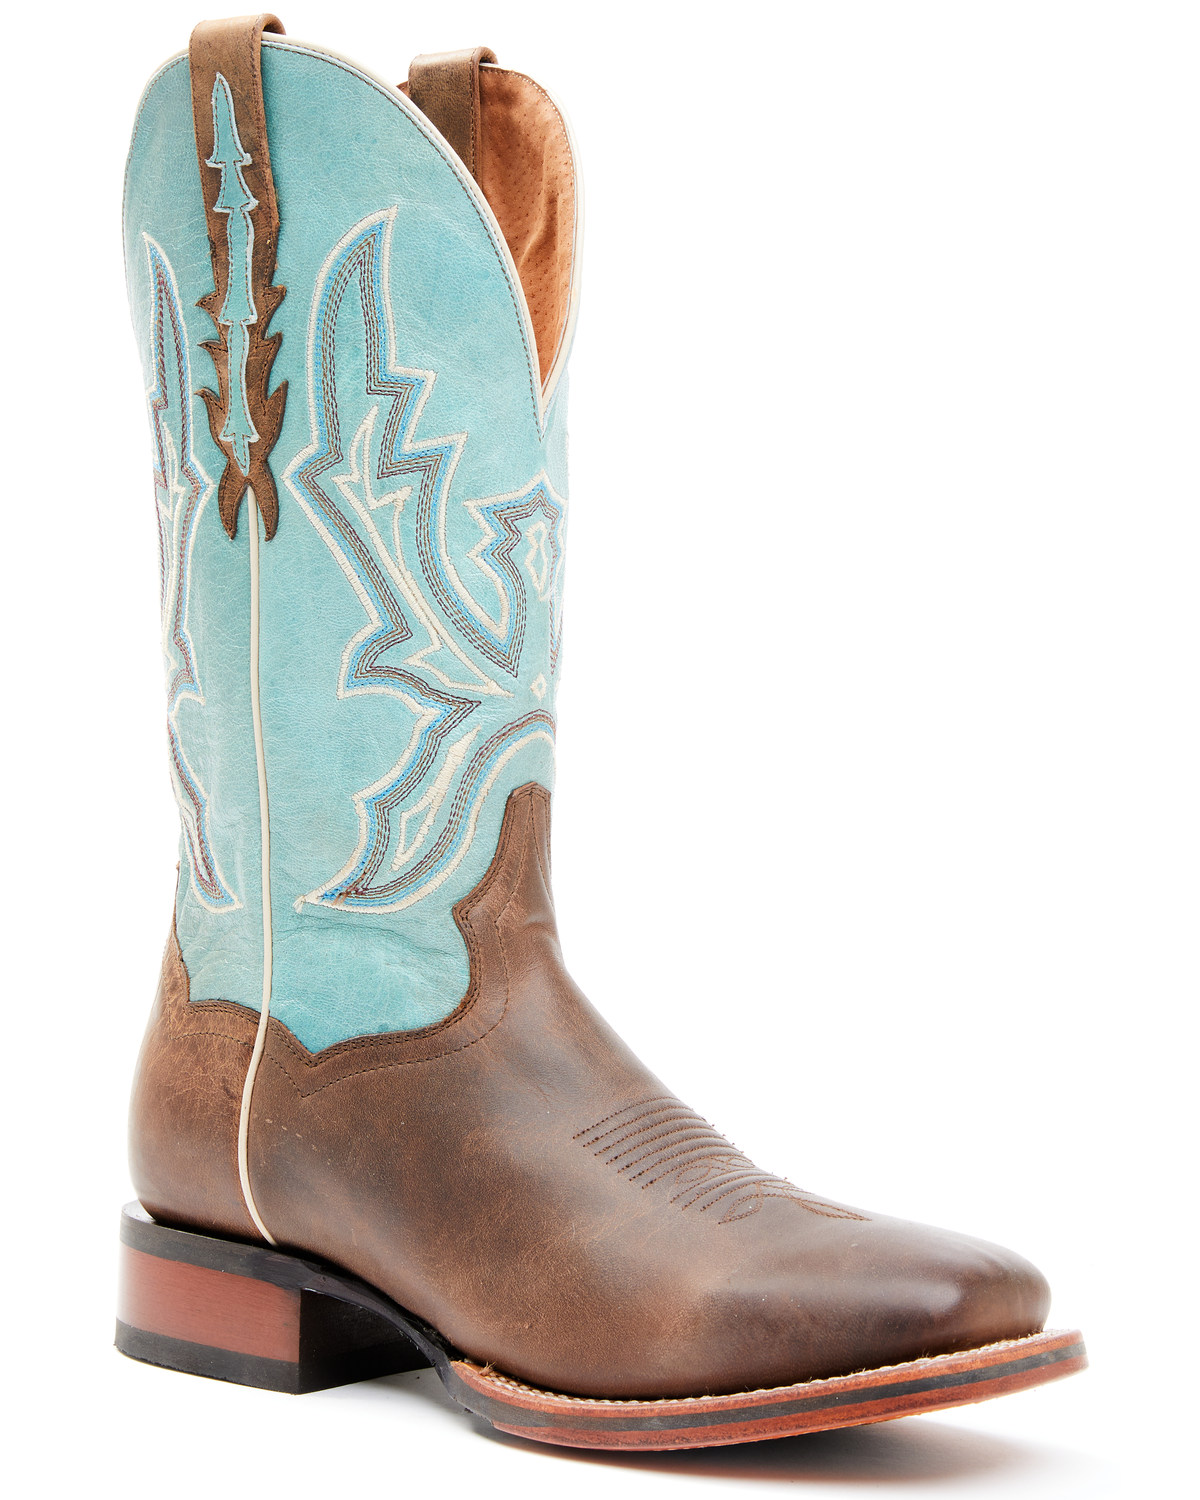 Dan Post Men's Embroidered Western Performance Boots - Broad Square Toe